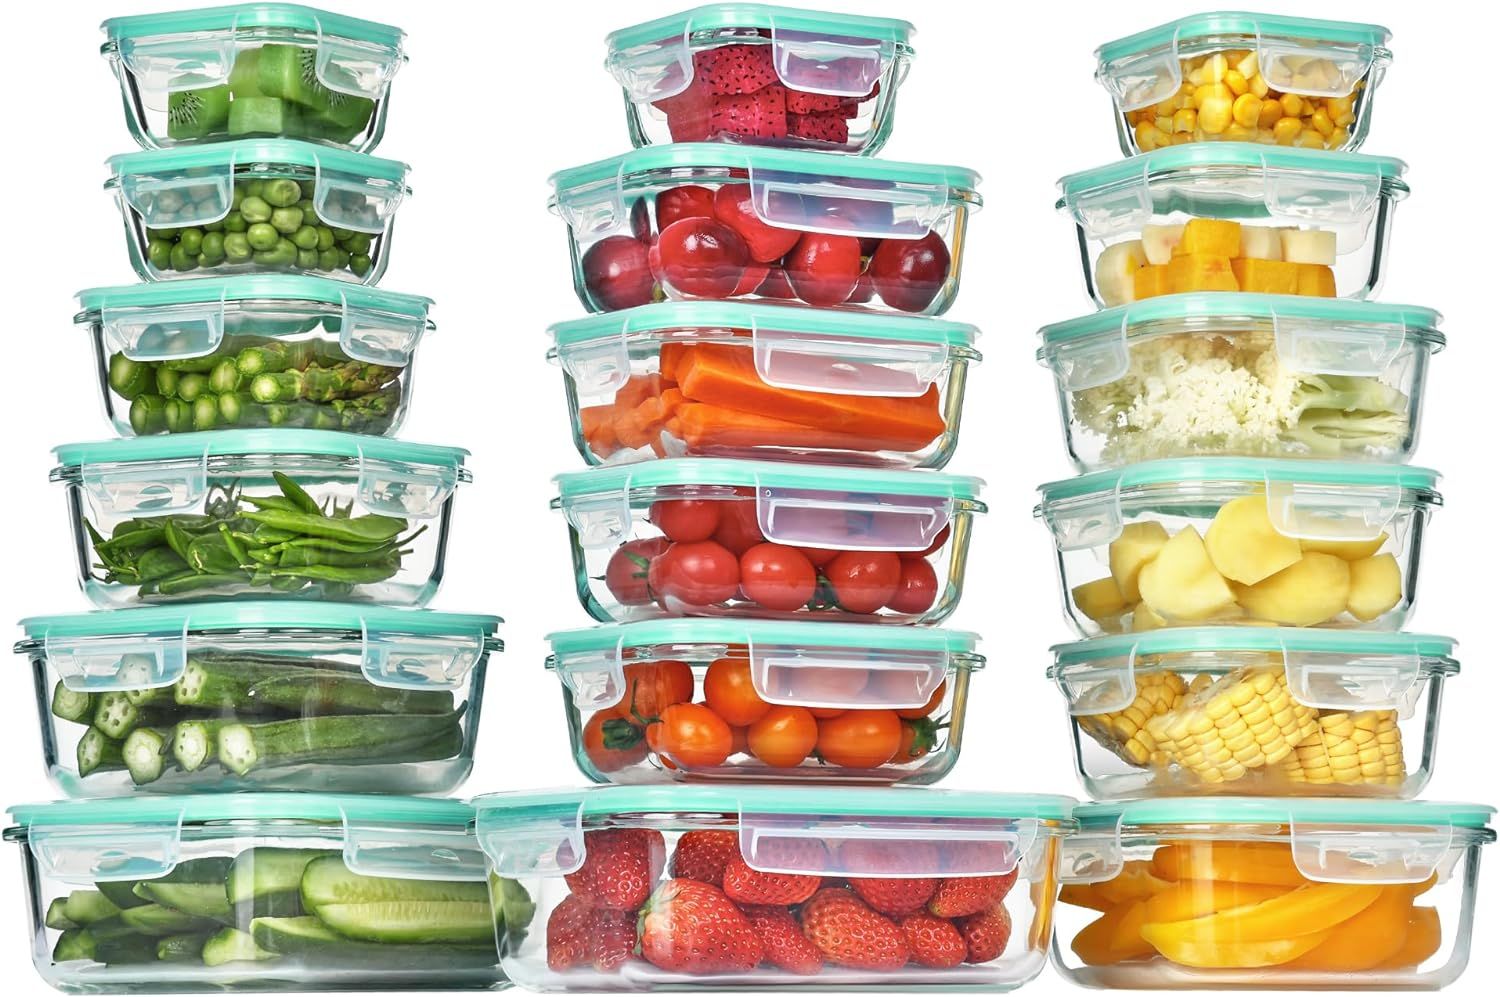 Vtopmart 18Pack Glass Food Storage Containers with Lids, Meal Prep Containers, Airtight Lunch Con... | Amazon (US)